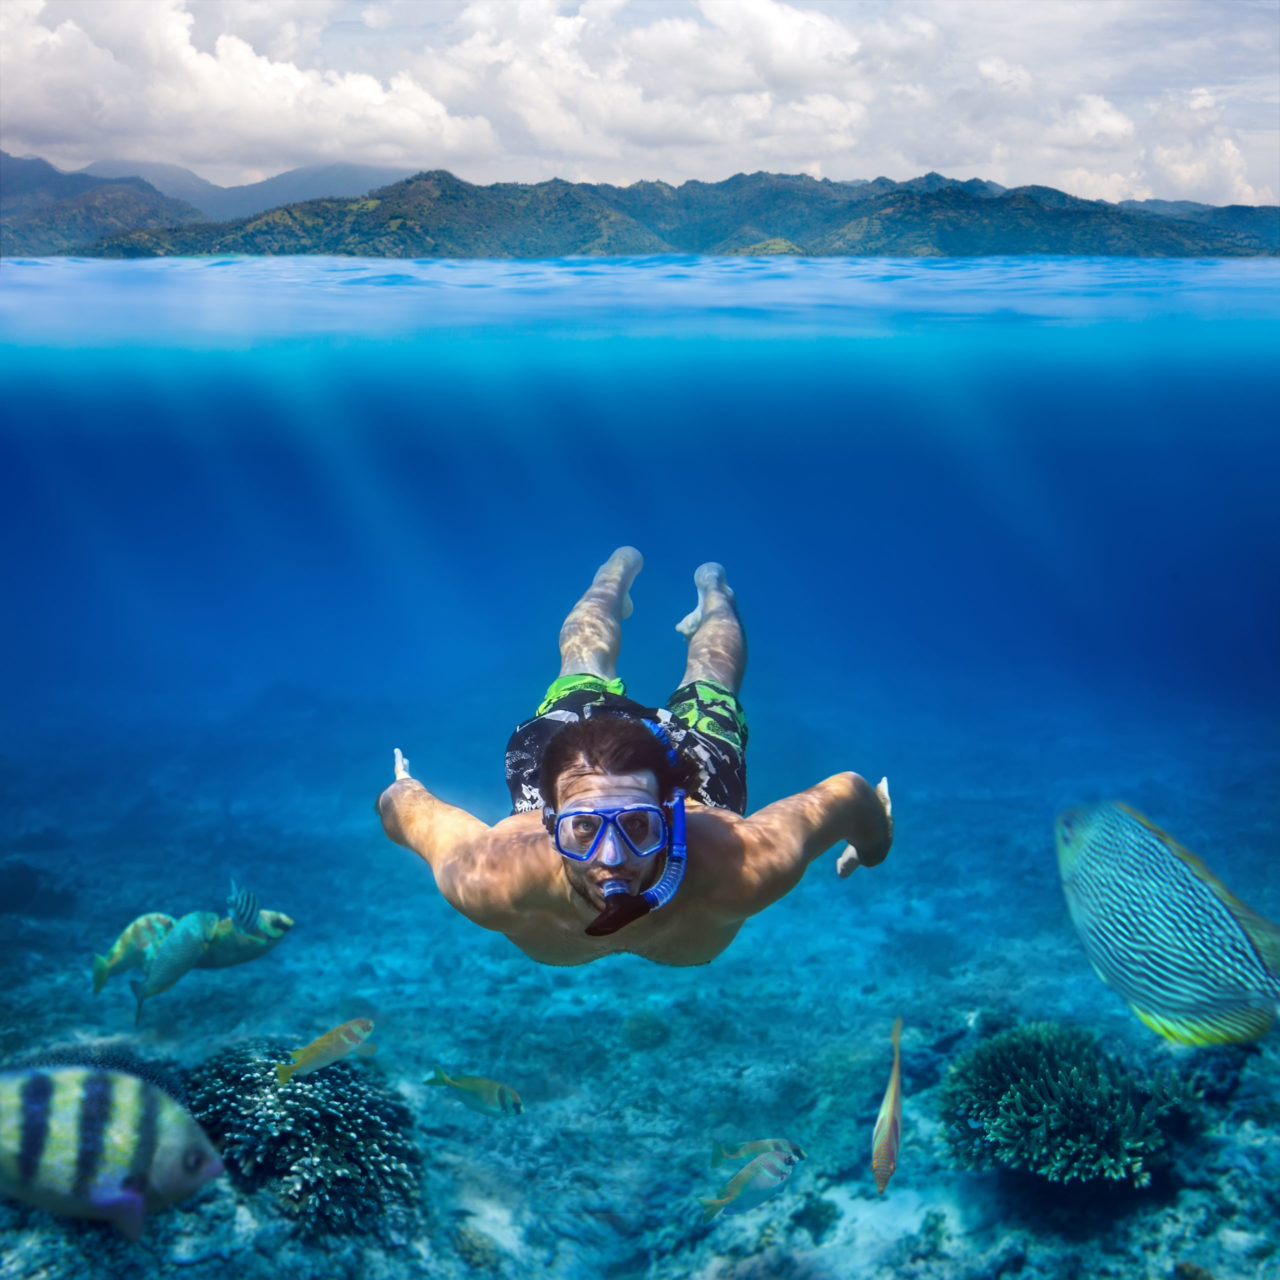 A man snorkeling under water in the ocean surrounded by fish with a mountain landscape in the horizon.